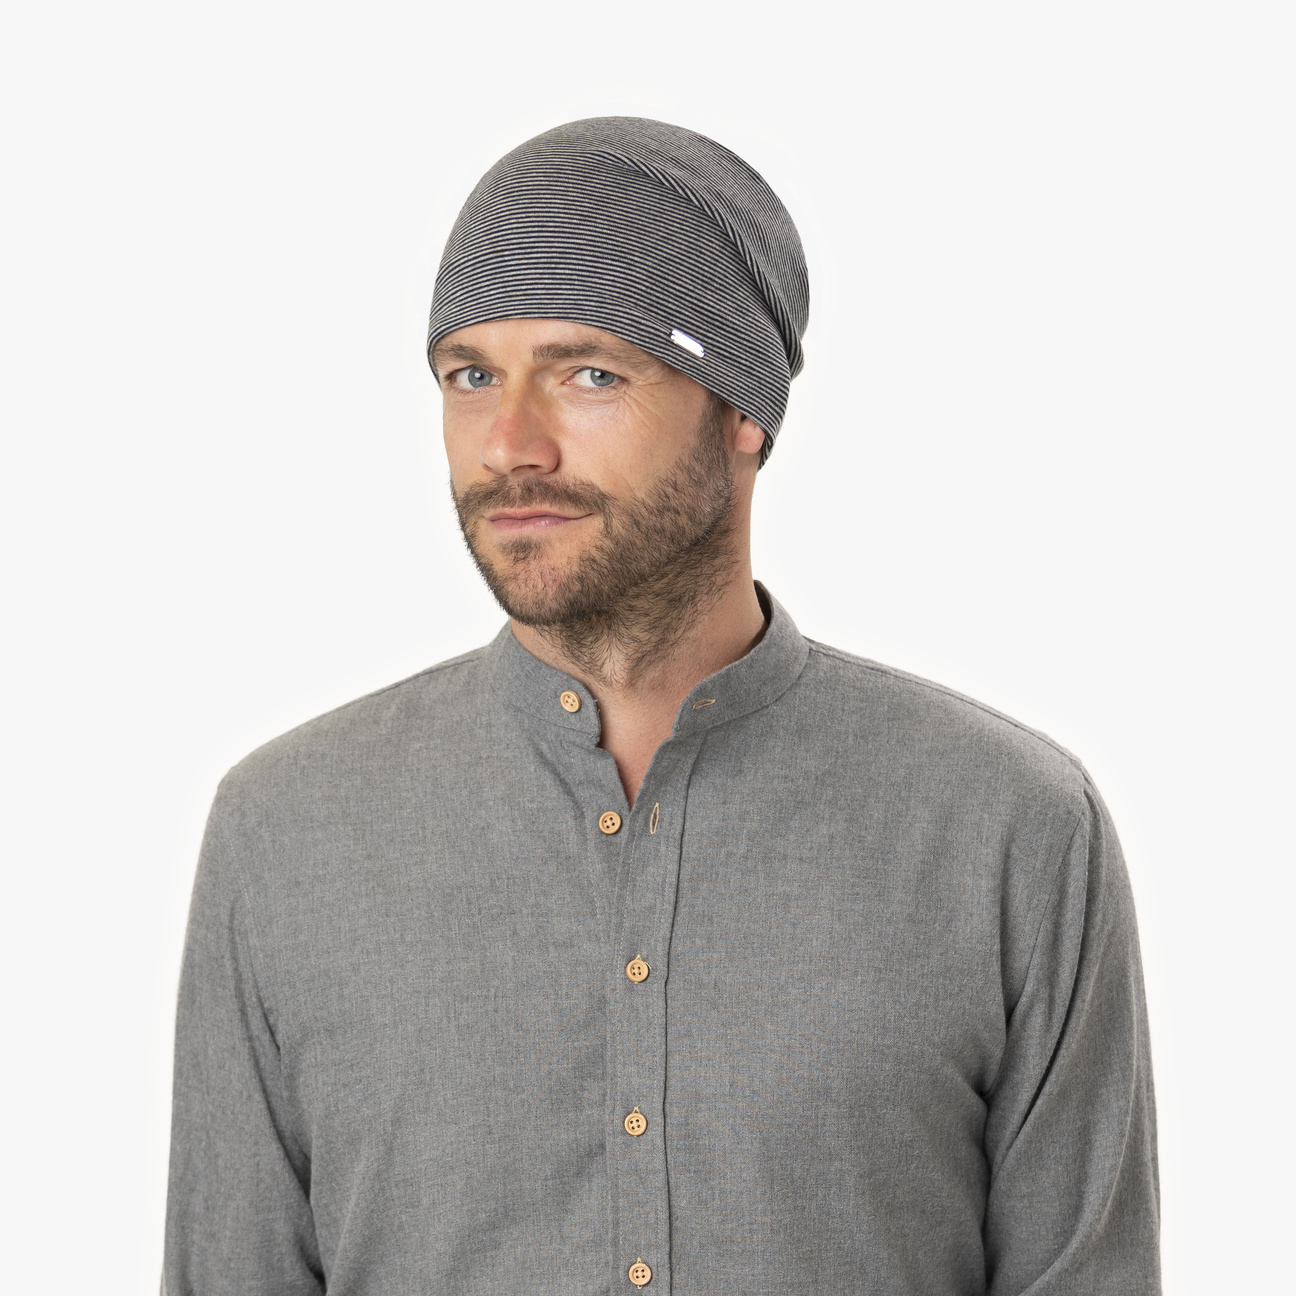 Pittsburgh Oversize Beanie by Chillouts - € 24,95